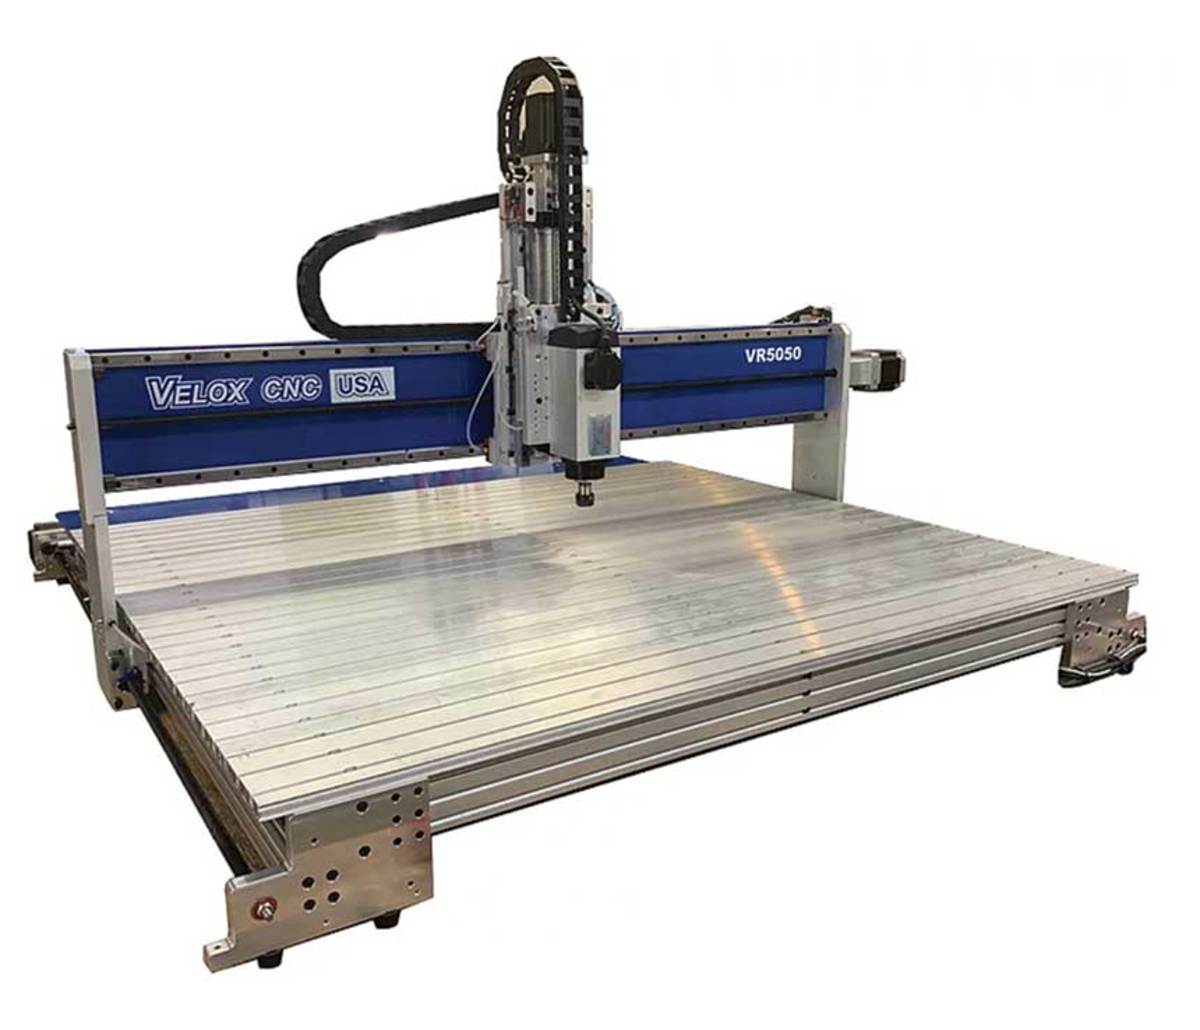 The VR5050 from Velox CNC.